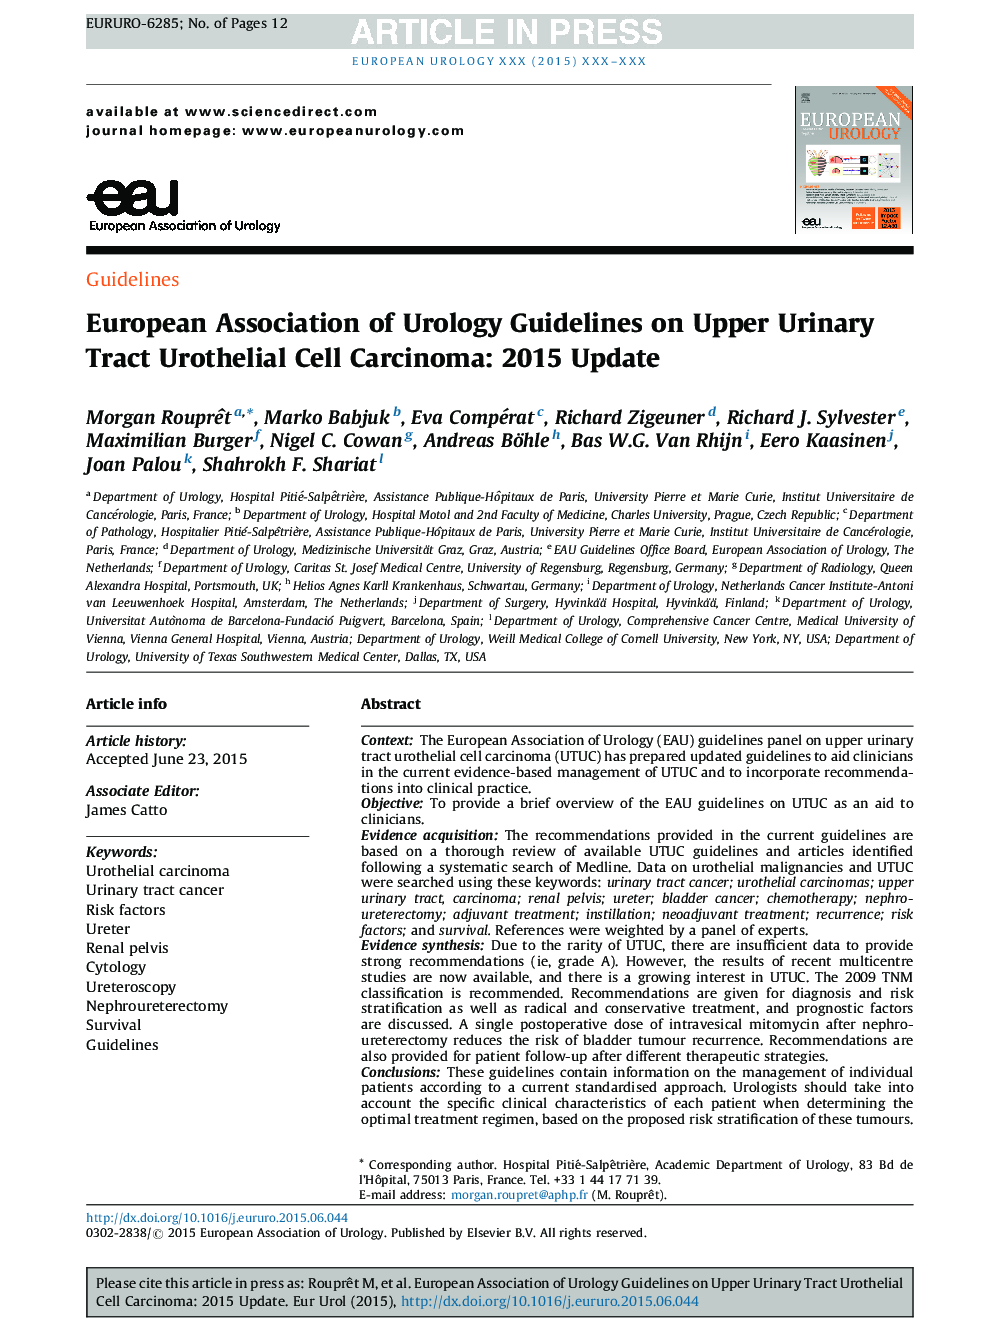 European Association of Urology Guidelines on Upper Urinary Tract Urothelial Cell Carcinoma: 2015 Update